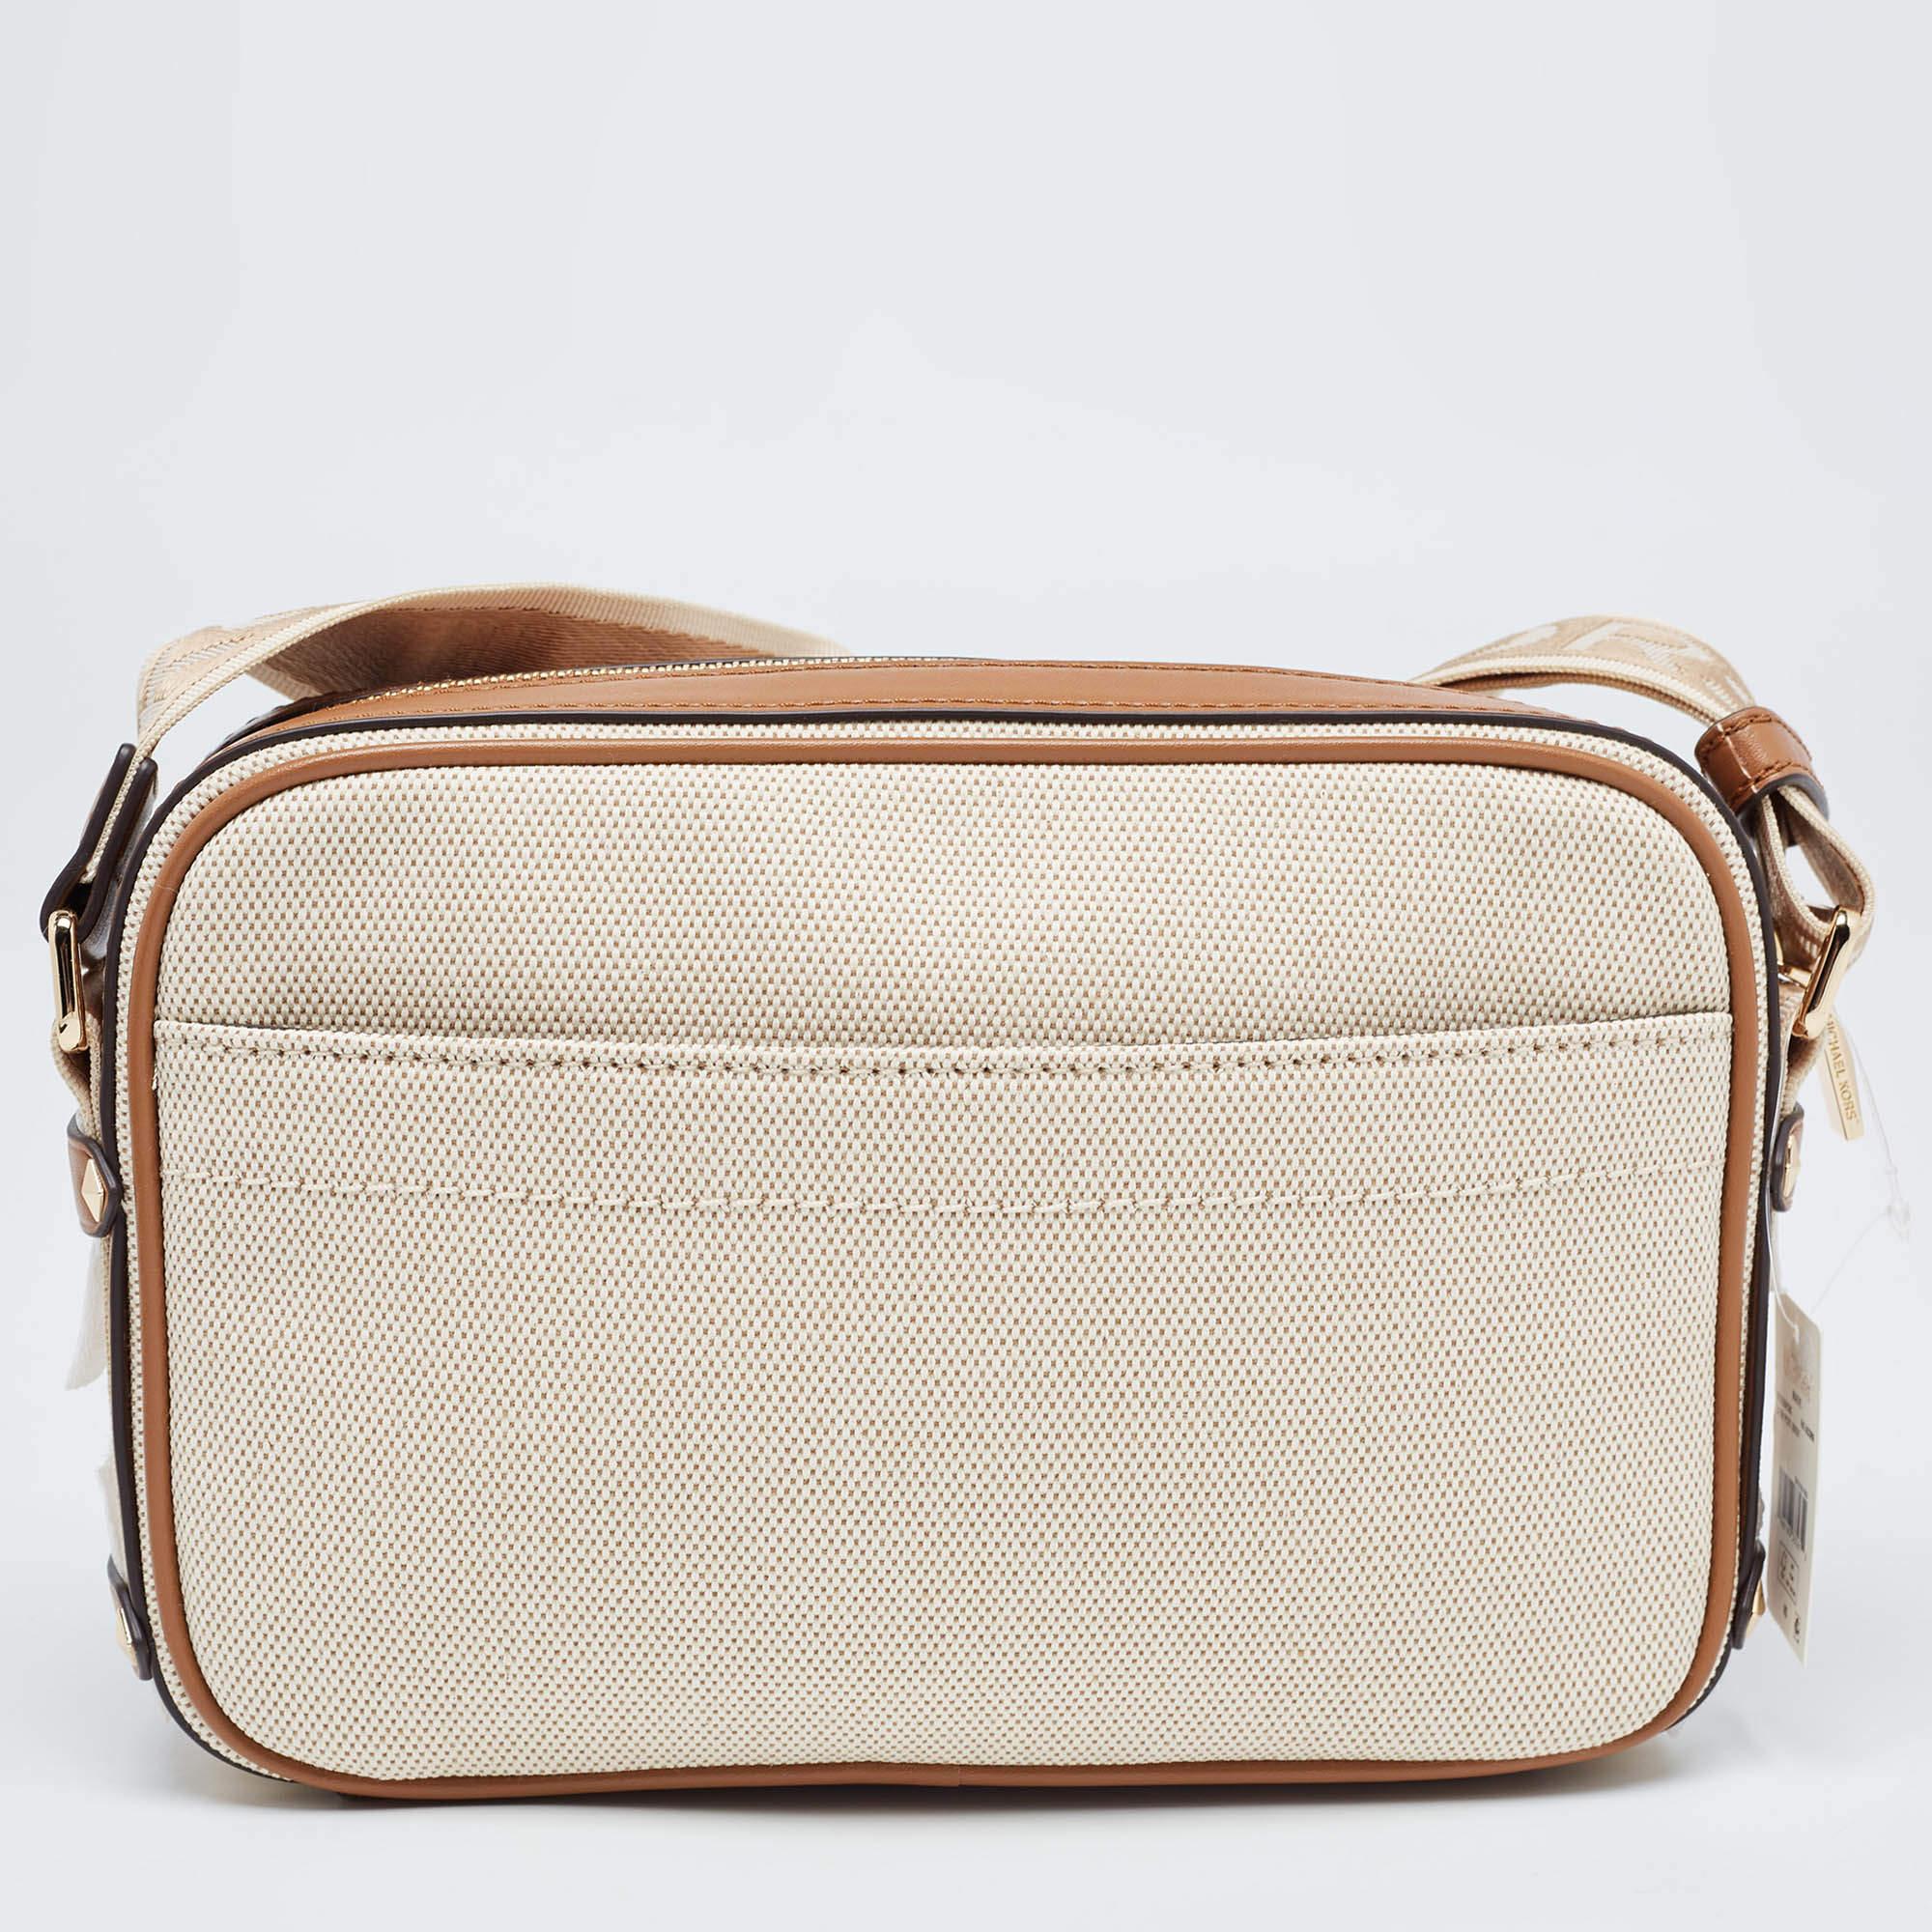 This Michael Kors bag is beautiful in so many ways. From its design to its structure, this bag exudes charm and high-end fashion. The bag flaunts the beige-tan signature coated canvas on the exterior with the gold-toned logo plaque and contrast